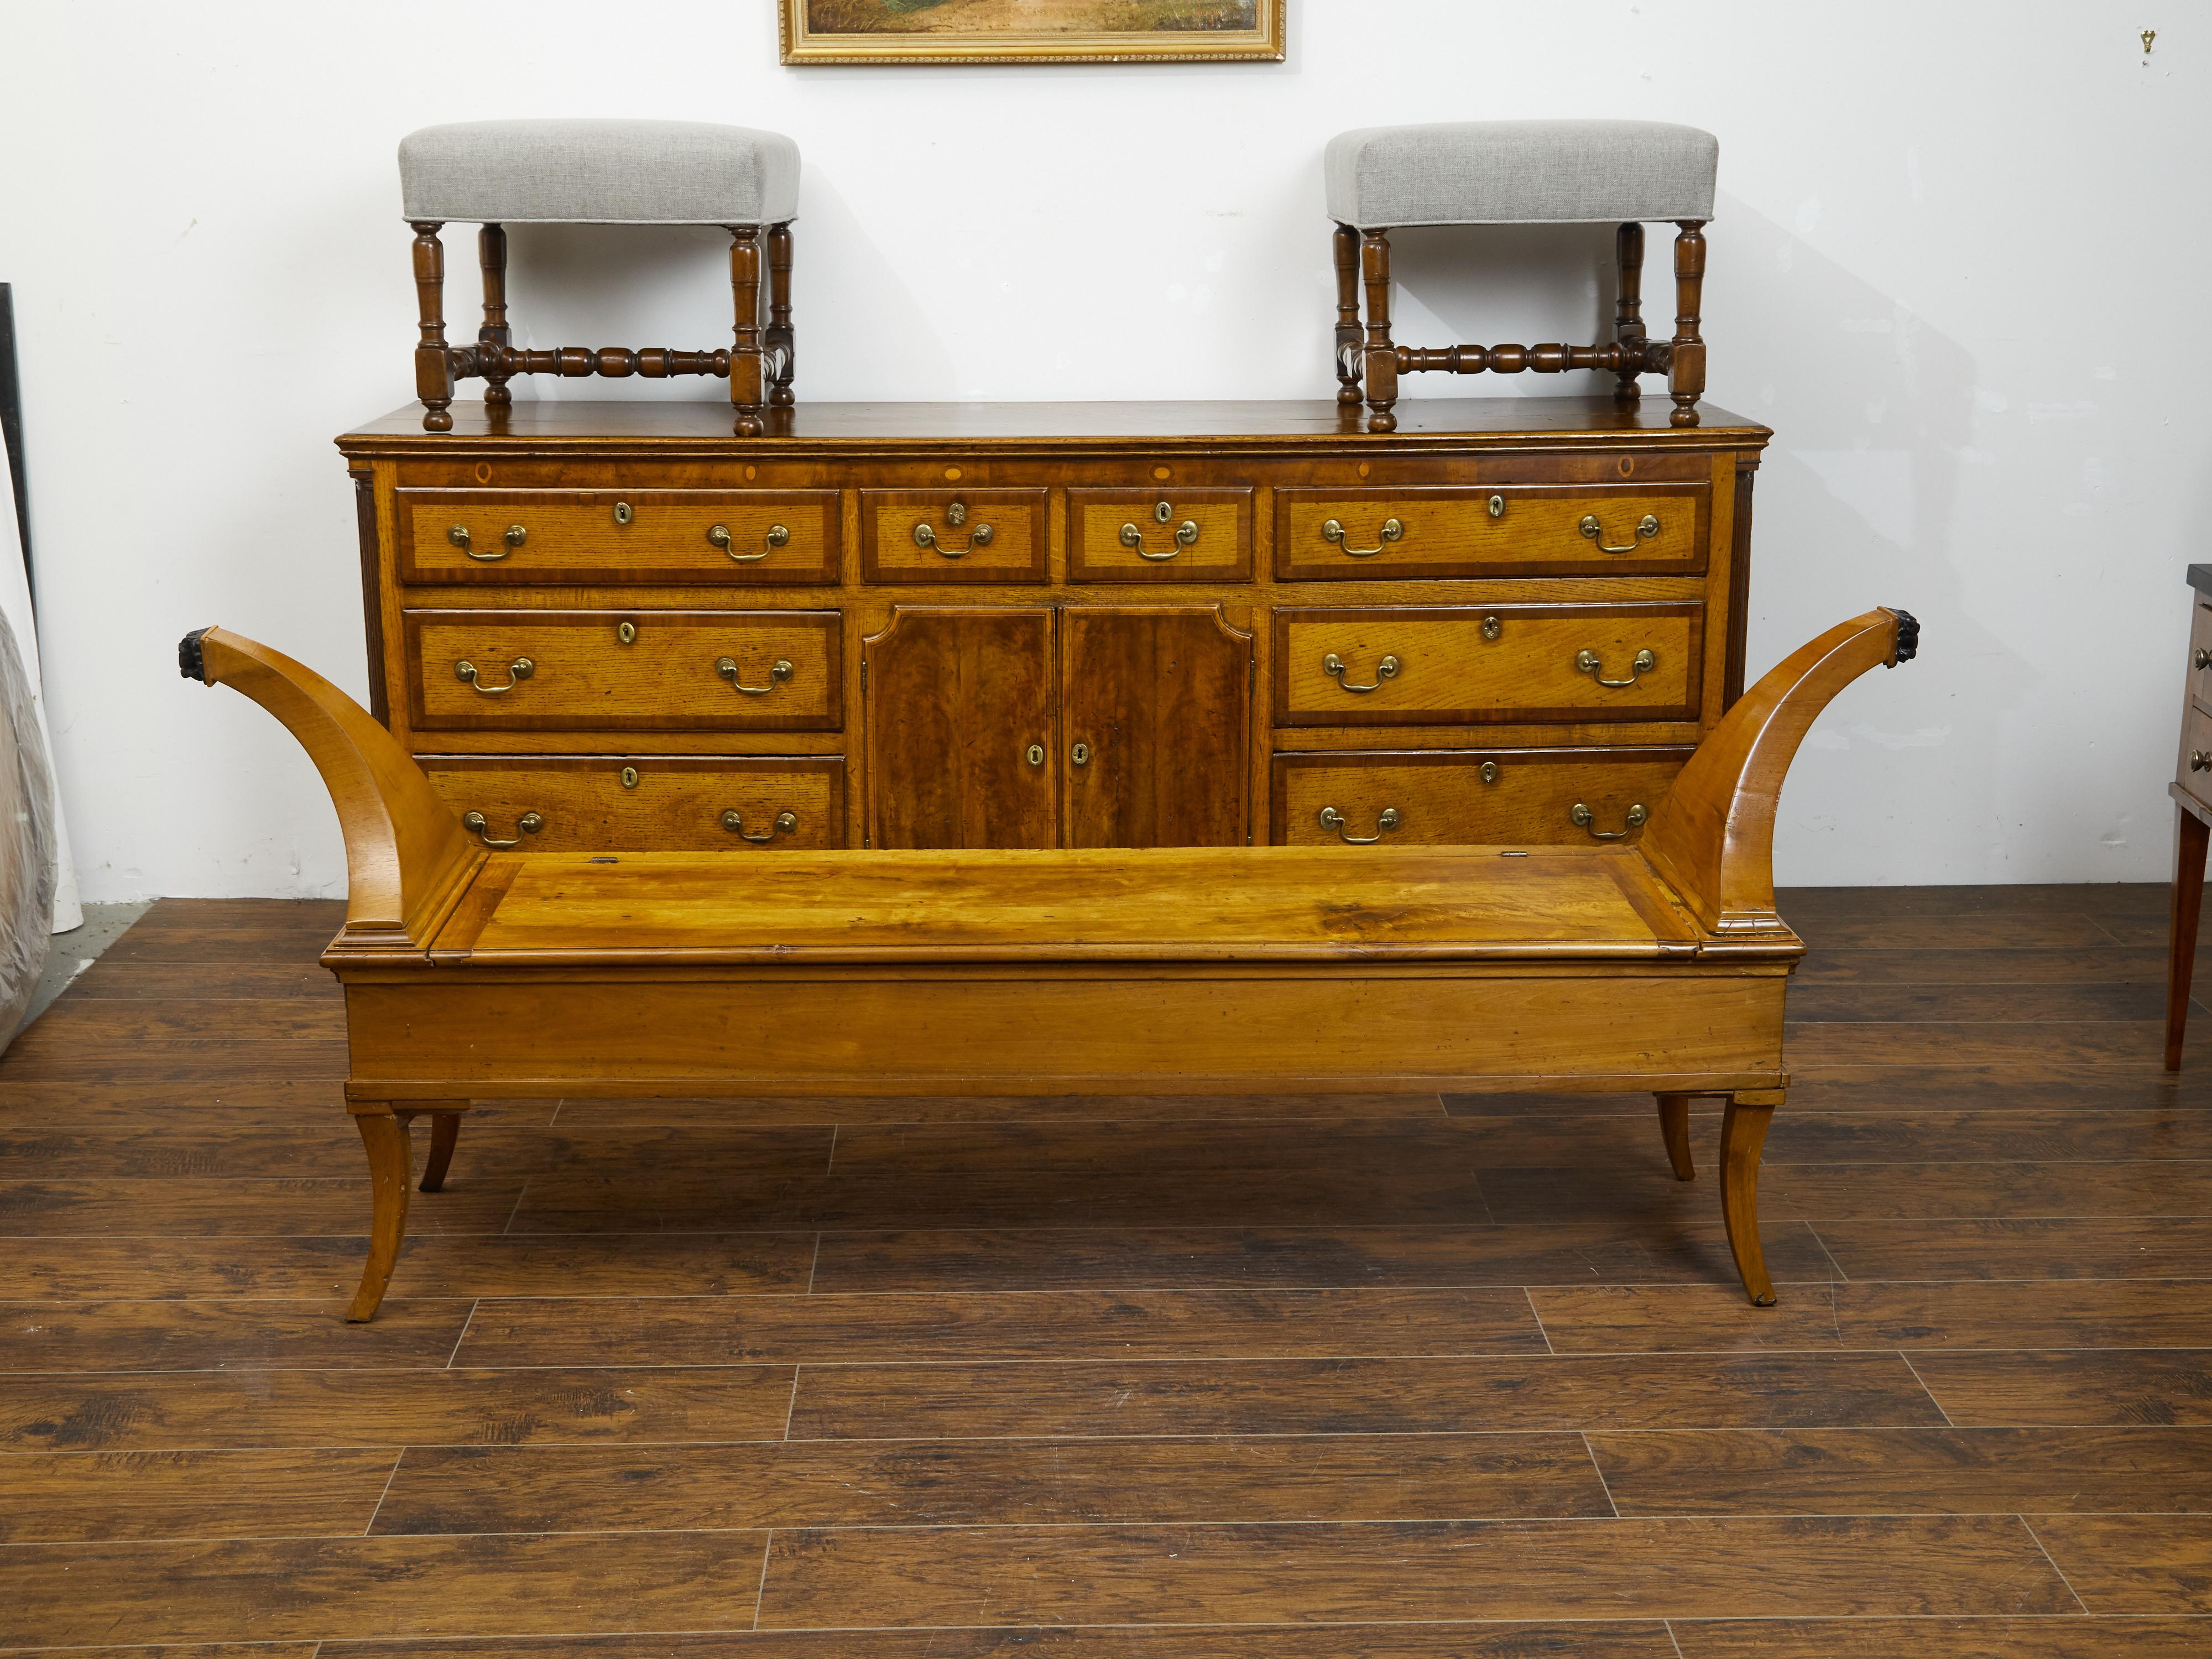 19th Century French 1820s Restauration Walnut Bench with Lift-Top Seat and Curving Arms For Sale